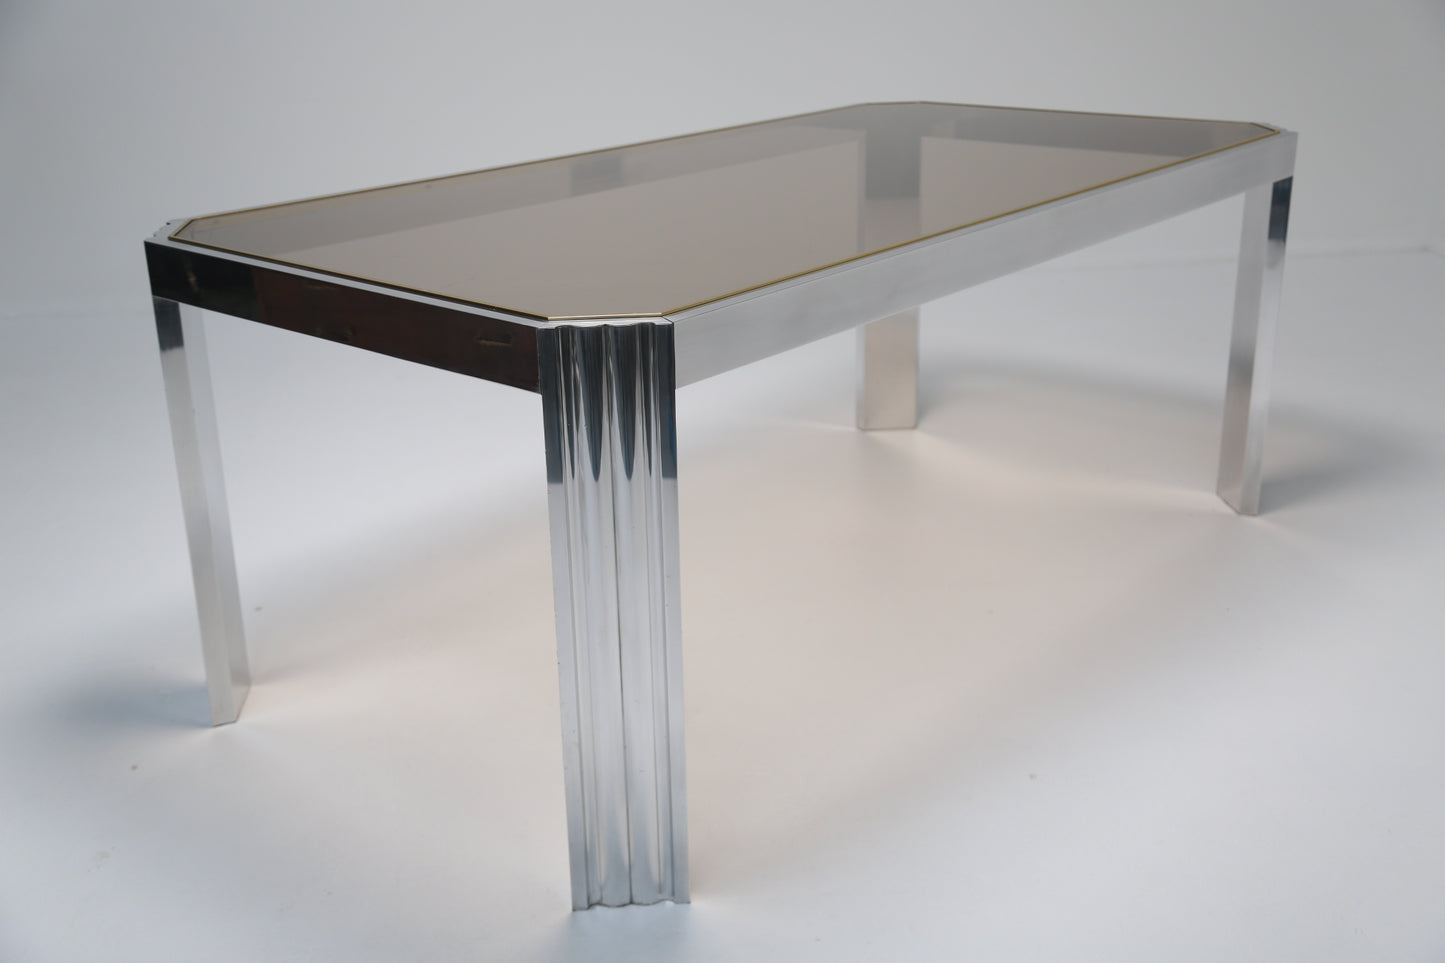 Aluminium dining table with glass top.